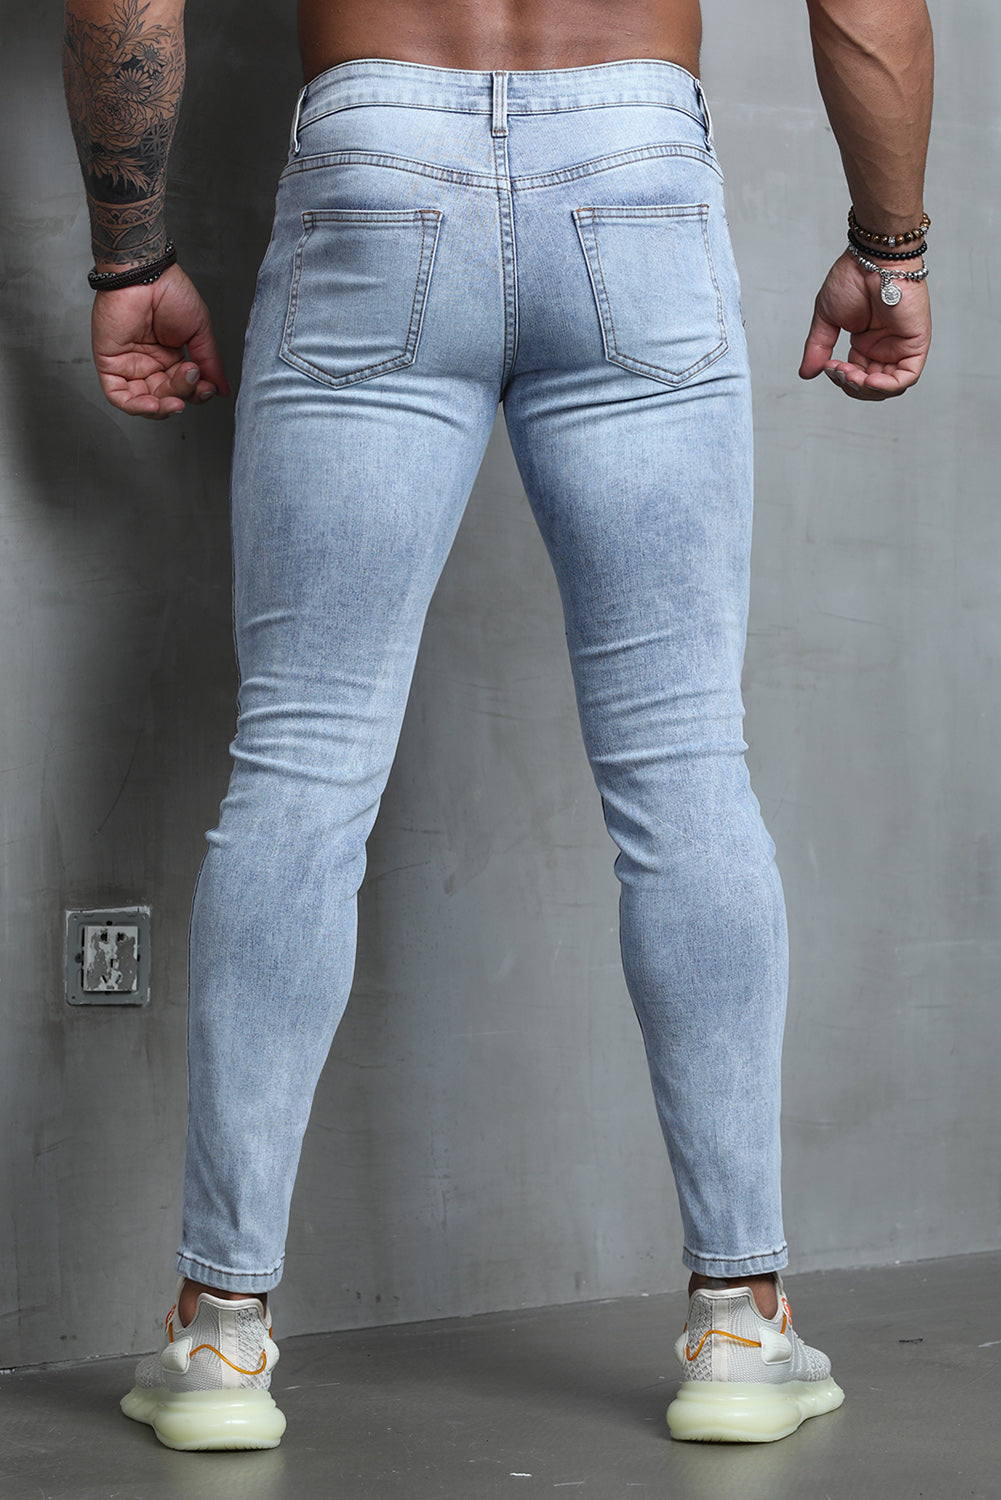 MC783128-4-S, MC783128-4-M, MC783128-4-L, MC783128-4-XL, MC783128-4-2XL, Sky Blue Skinny Jeans for Men Pride Gay Stripes and Stars Print Ripped Denim Pants